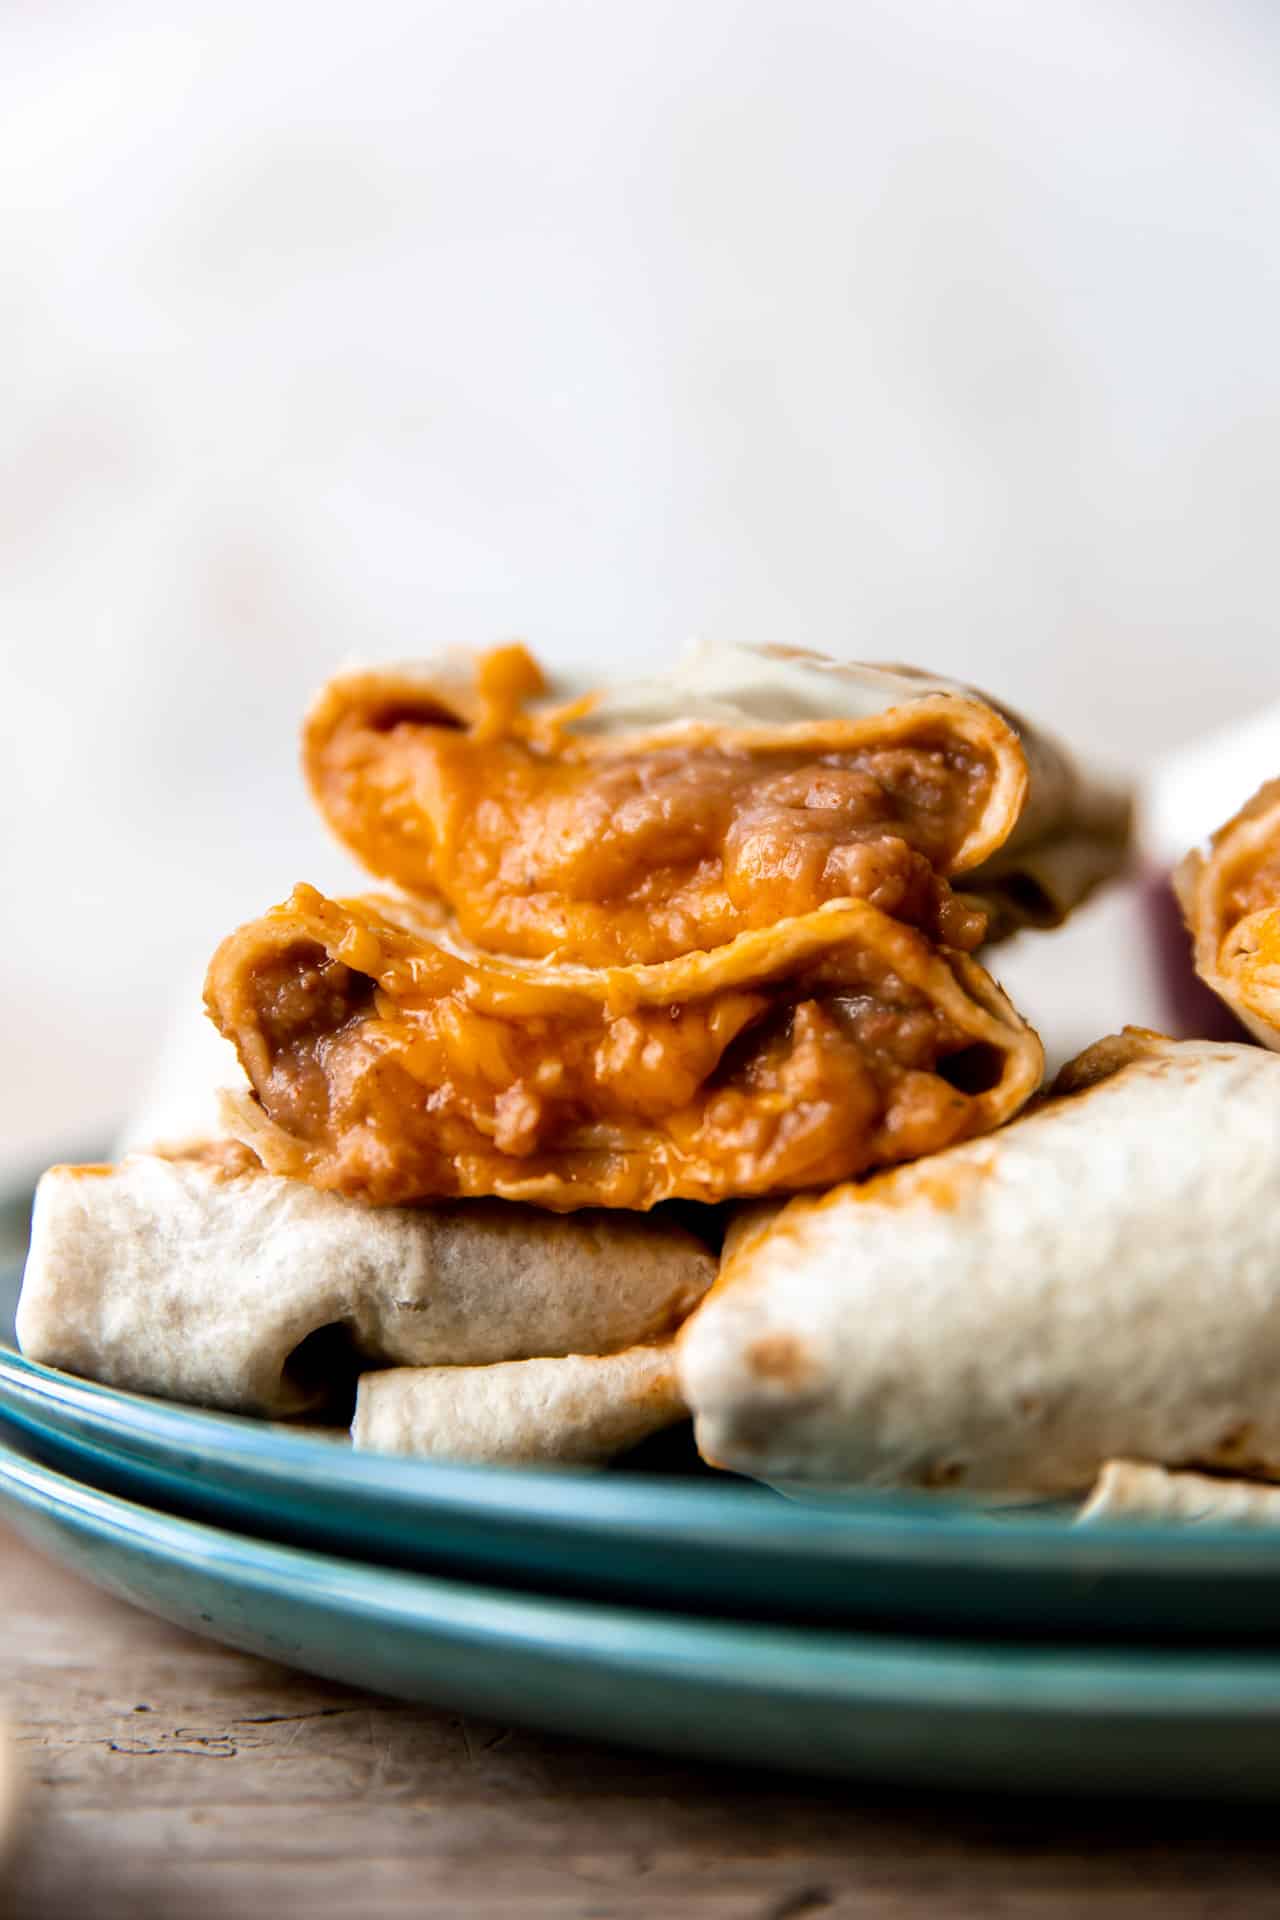 Bean and cheese burritos stacked on a plate showing melty cheese and creamy beans with red sauce inside.